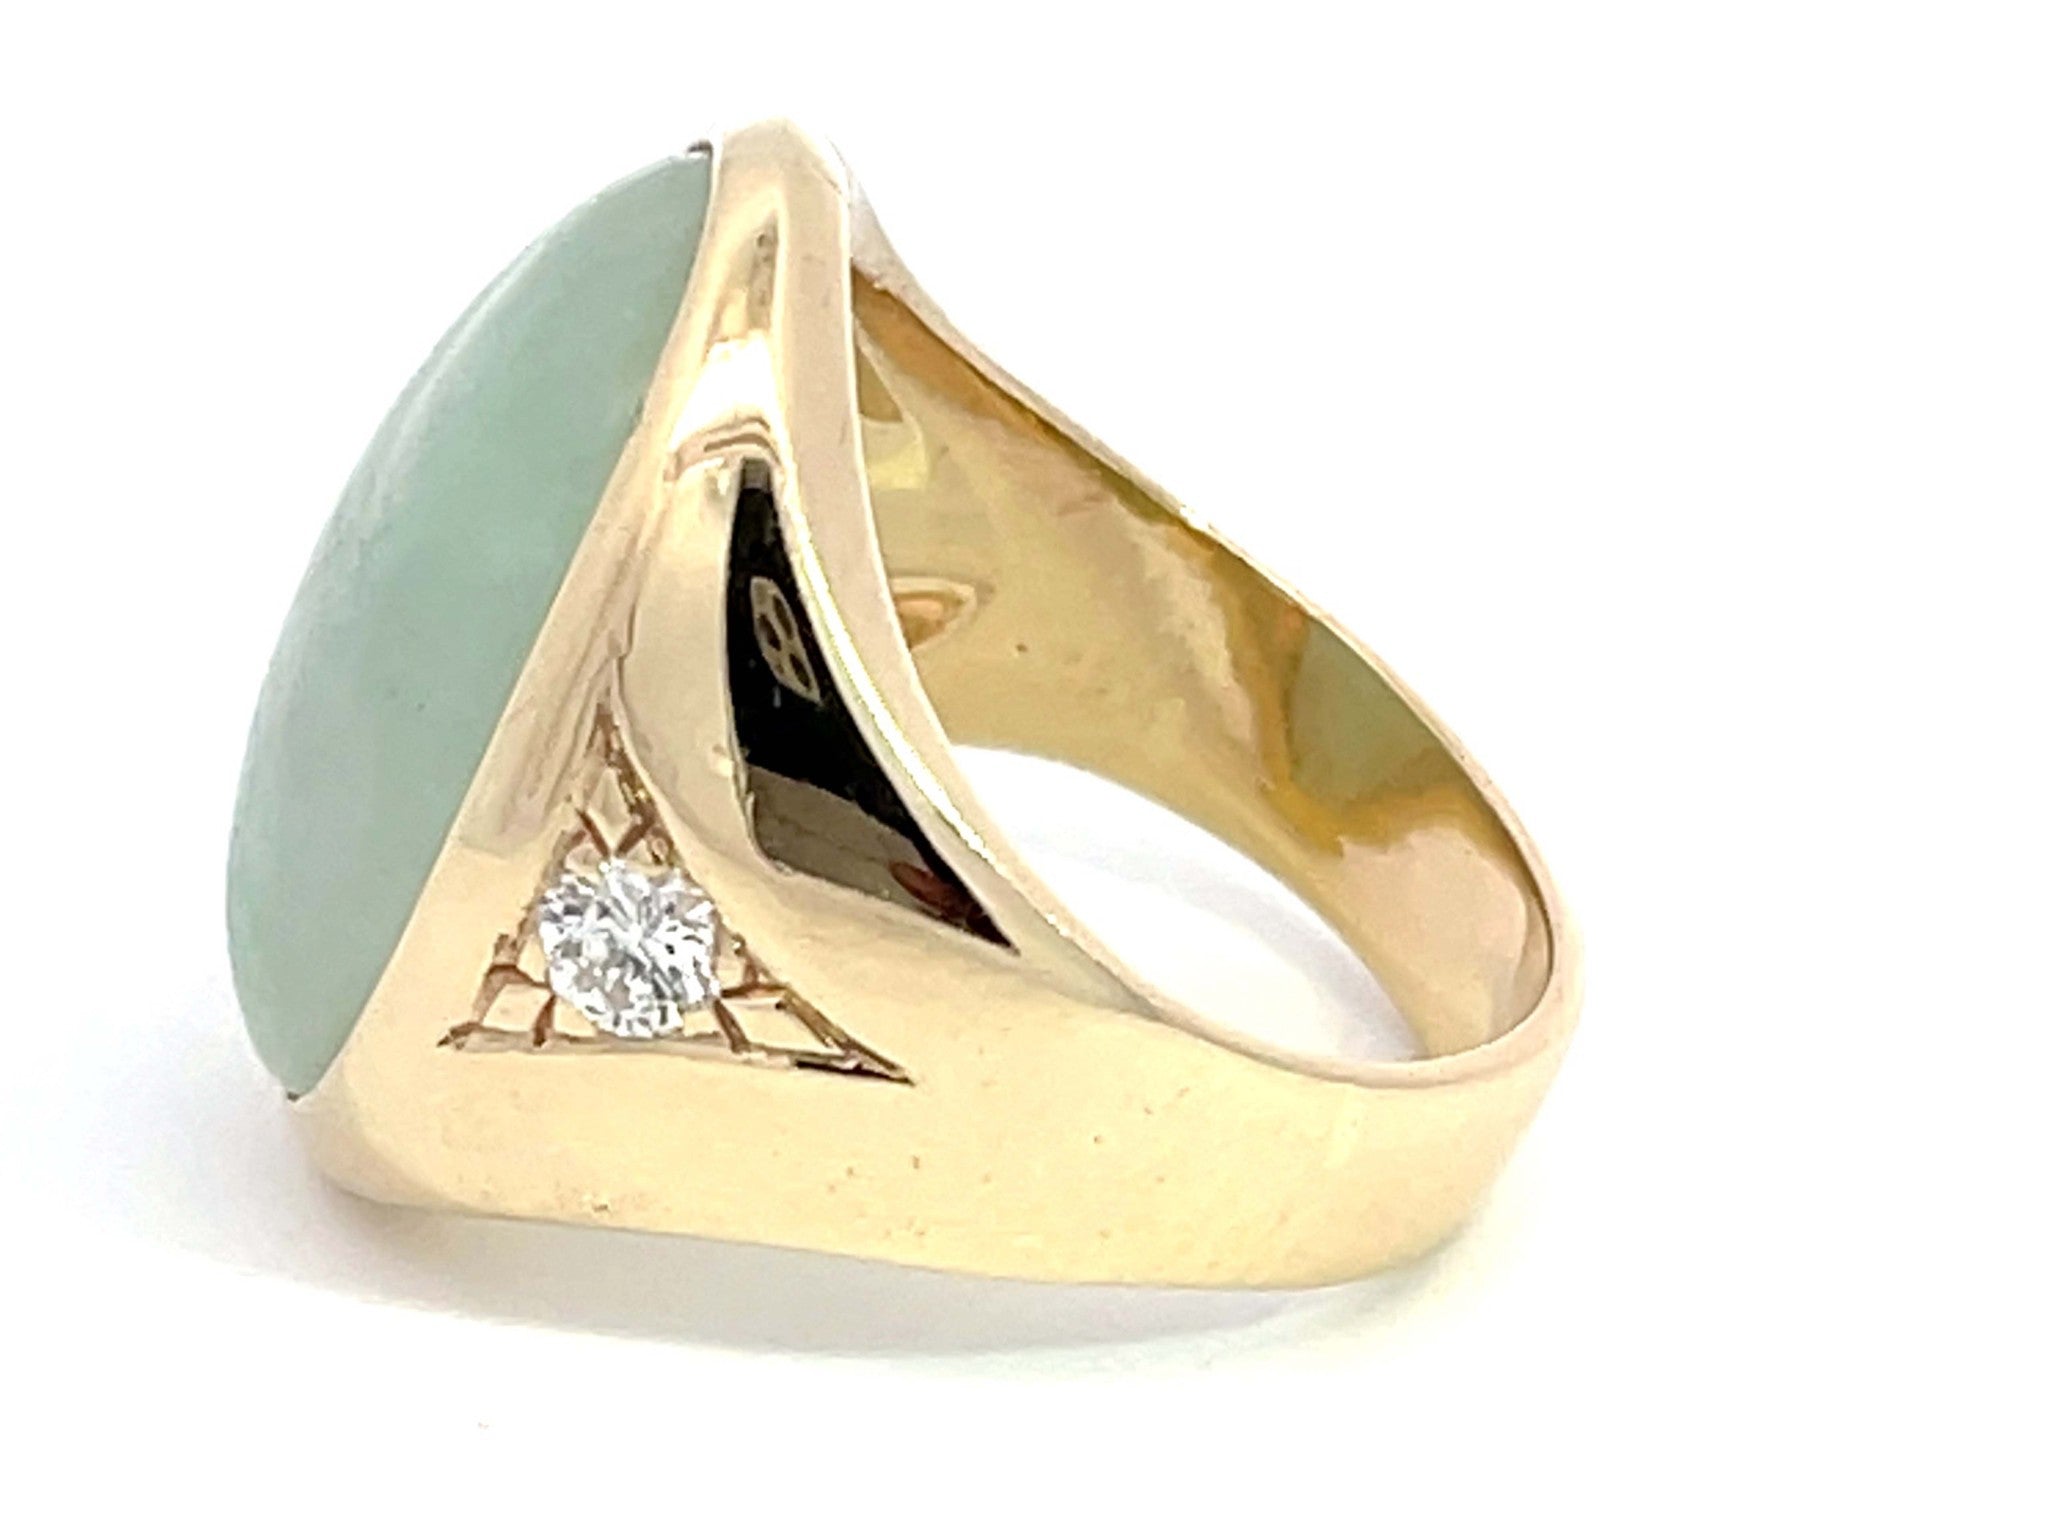 Oval Cabochon Pale Green Jade and Diamond Ring in 14K Yellow Gold